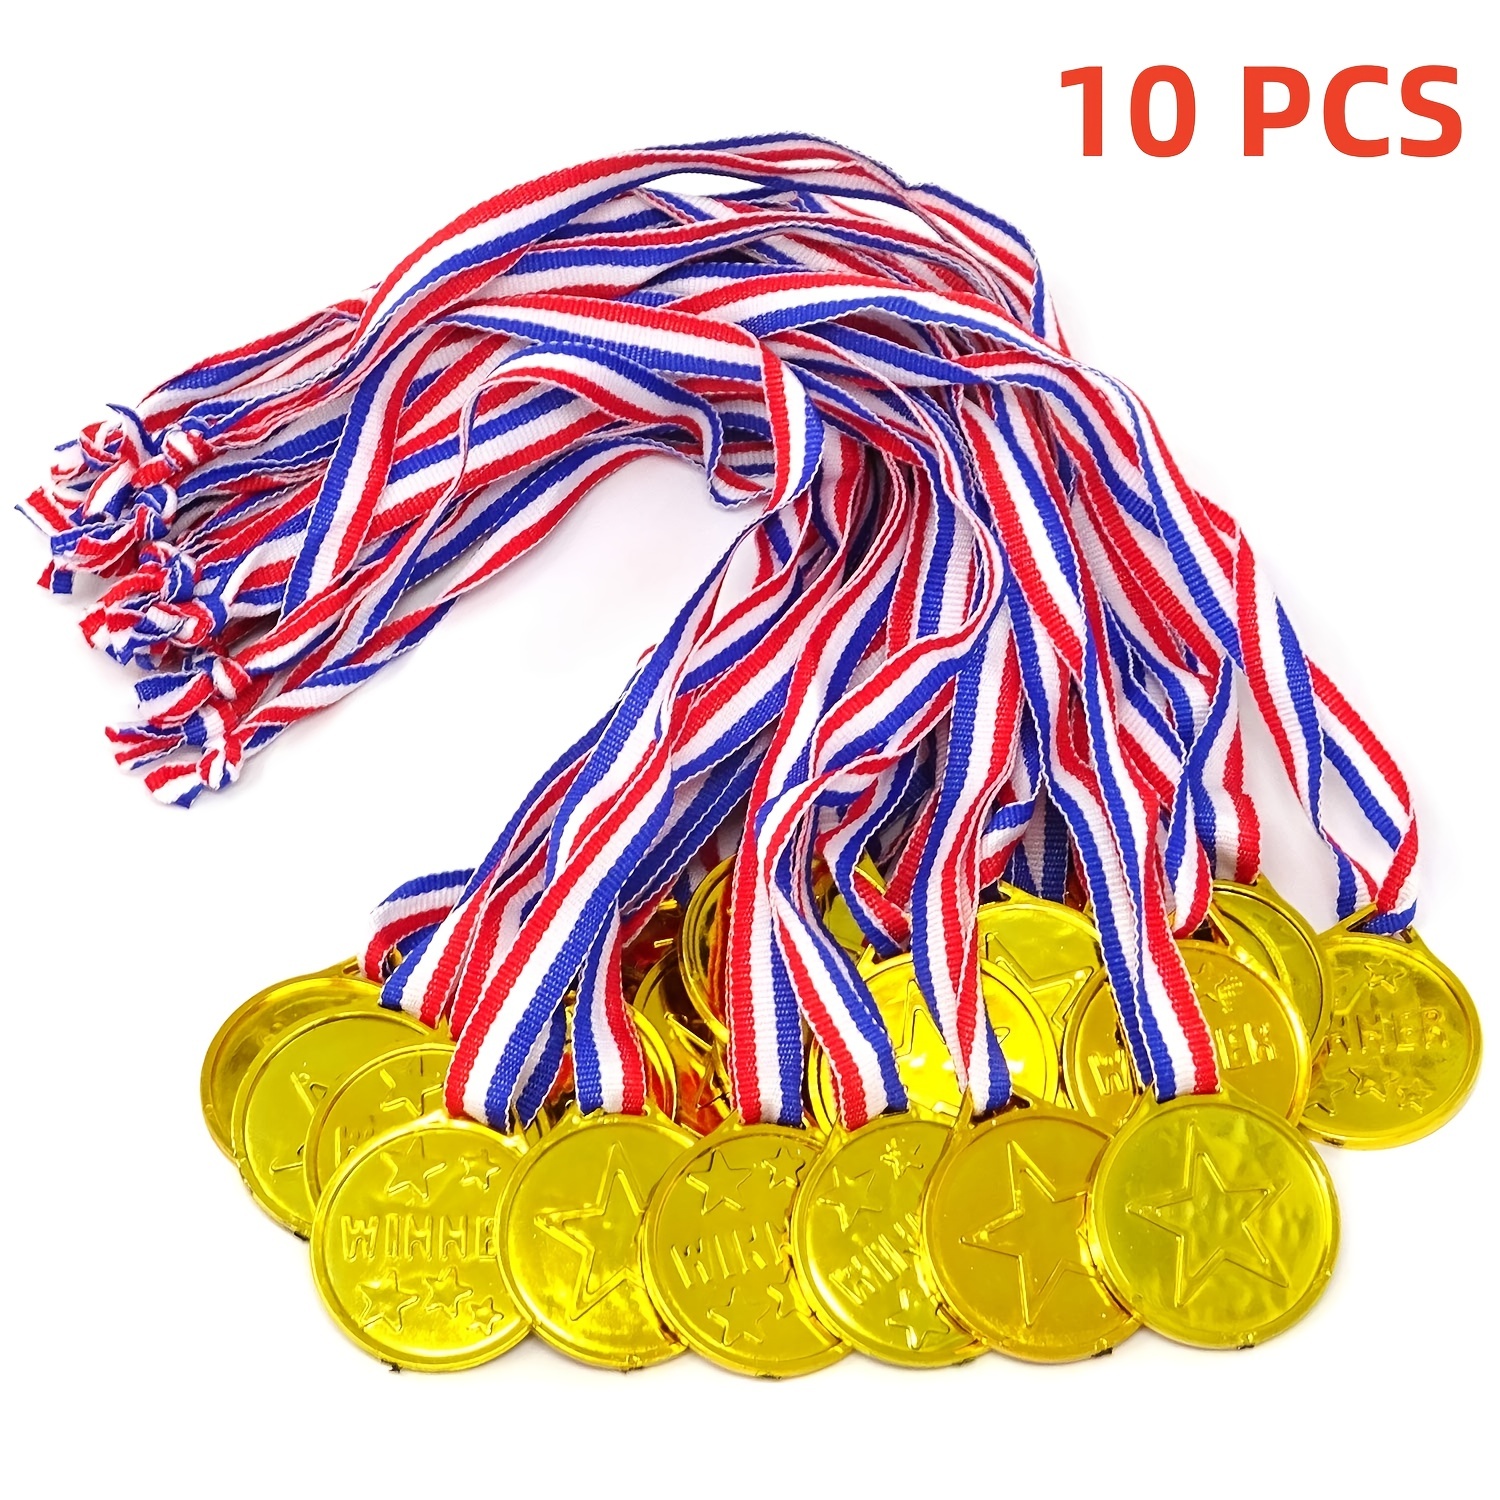 10pcs Golden Plastic Award Medals | Perfect for Sports Competitions & Talent Shows